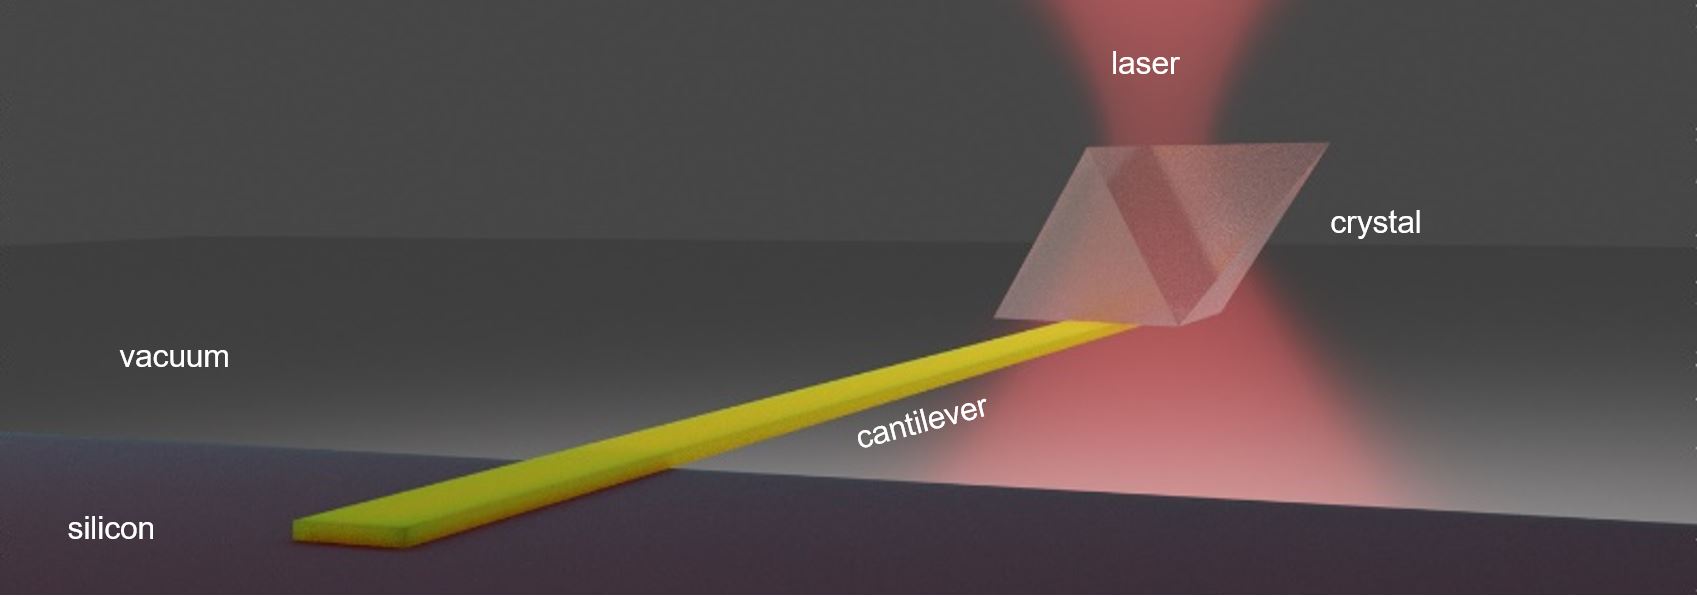 UW researchers used an infrared laser to cool a solid semiconductor material